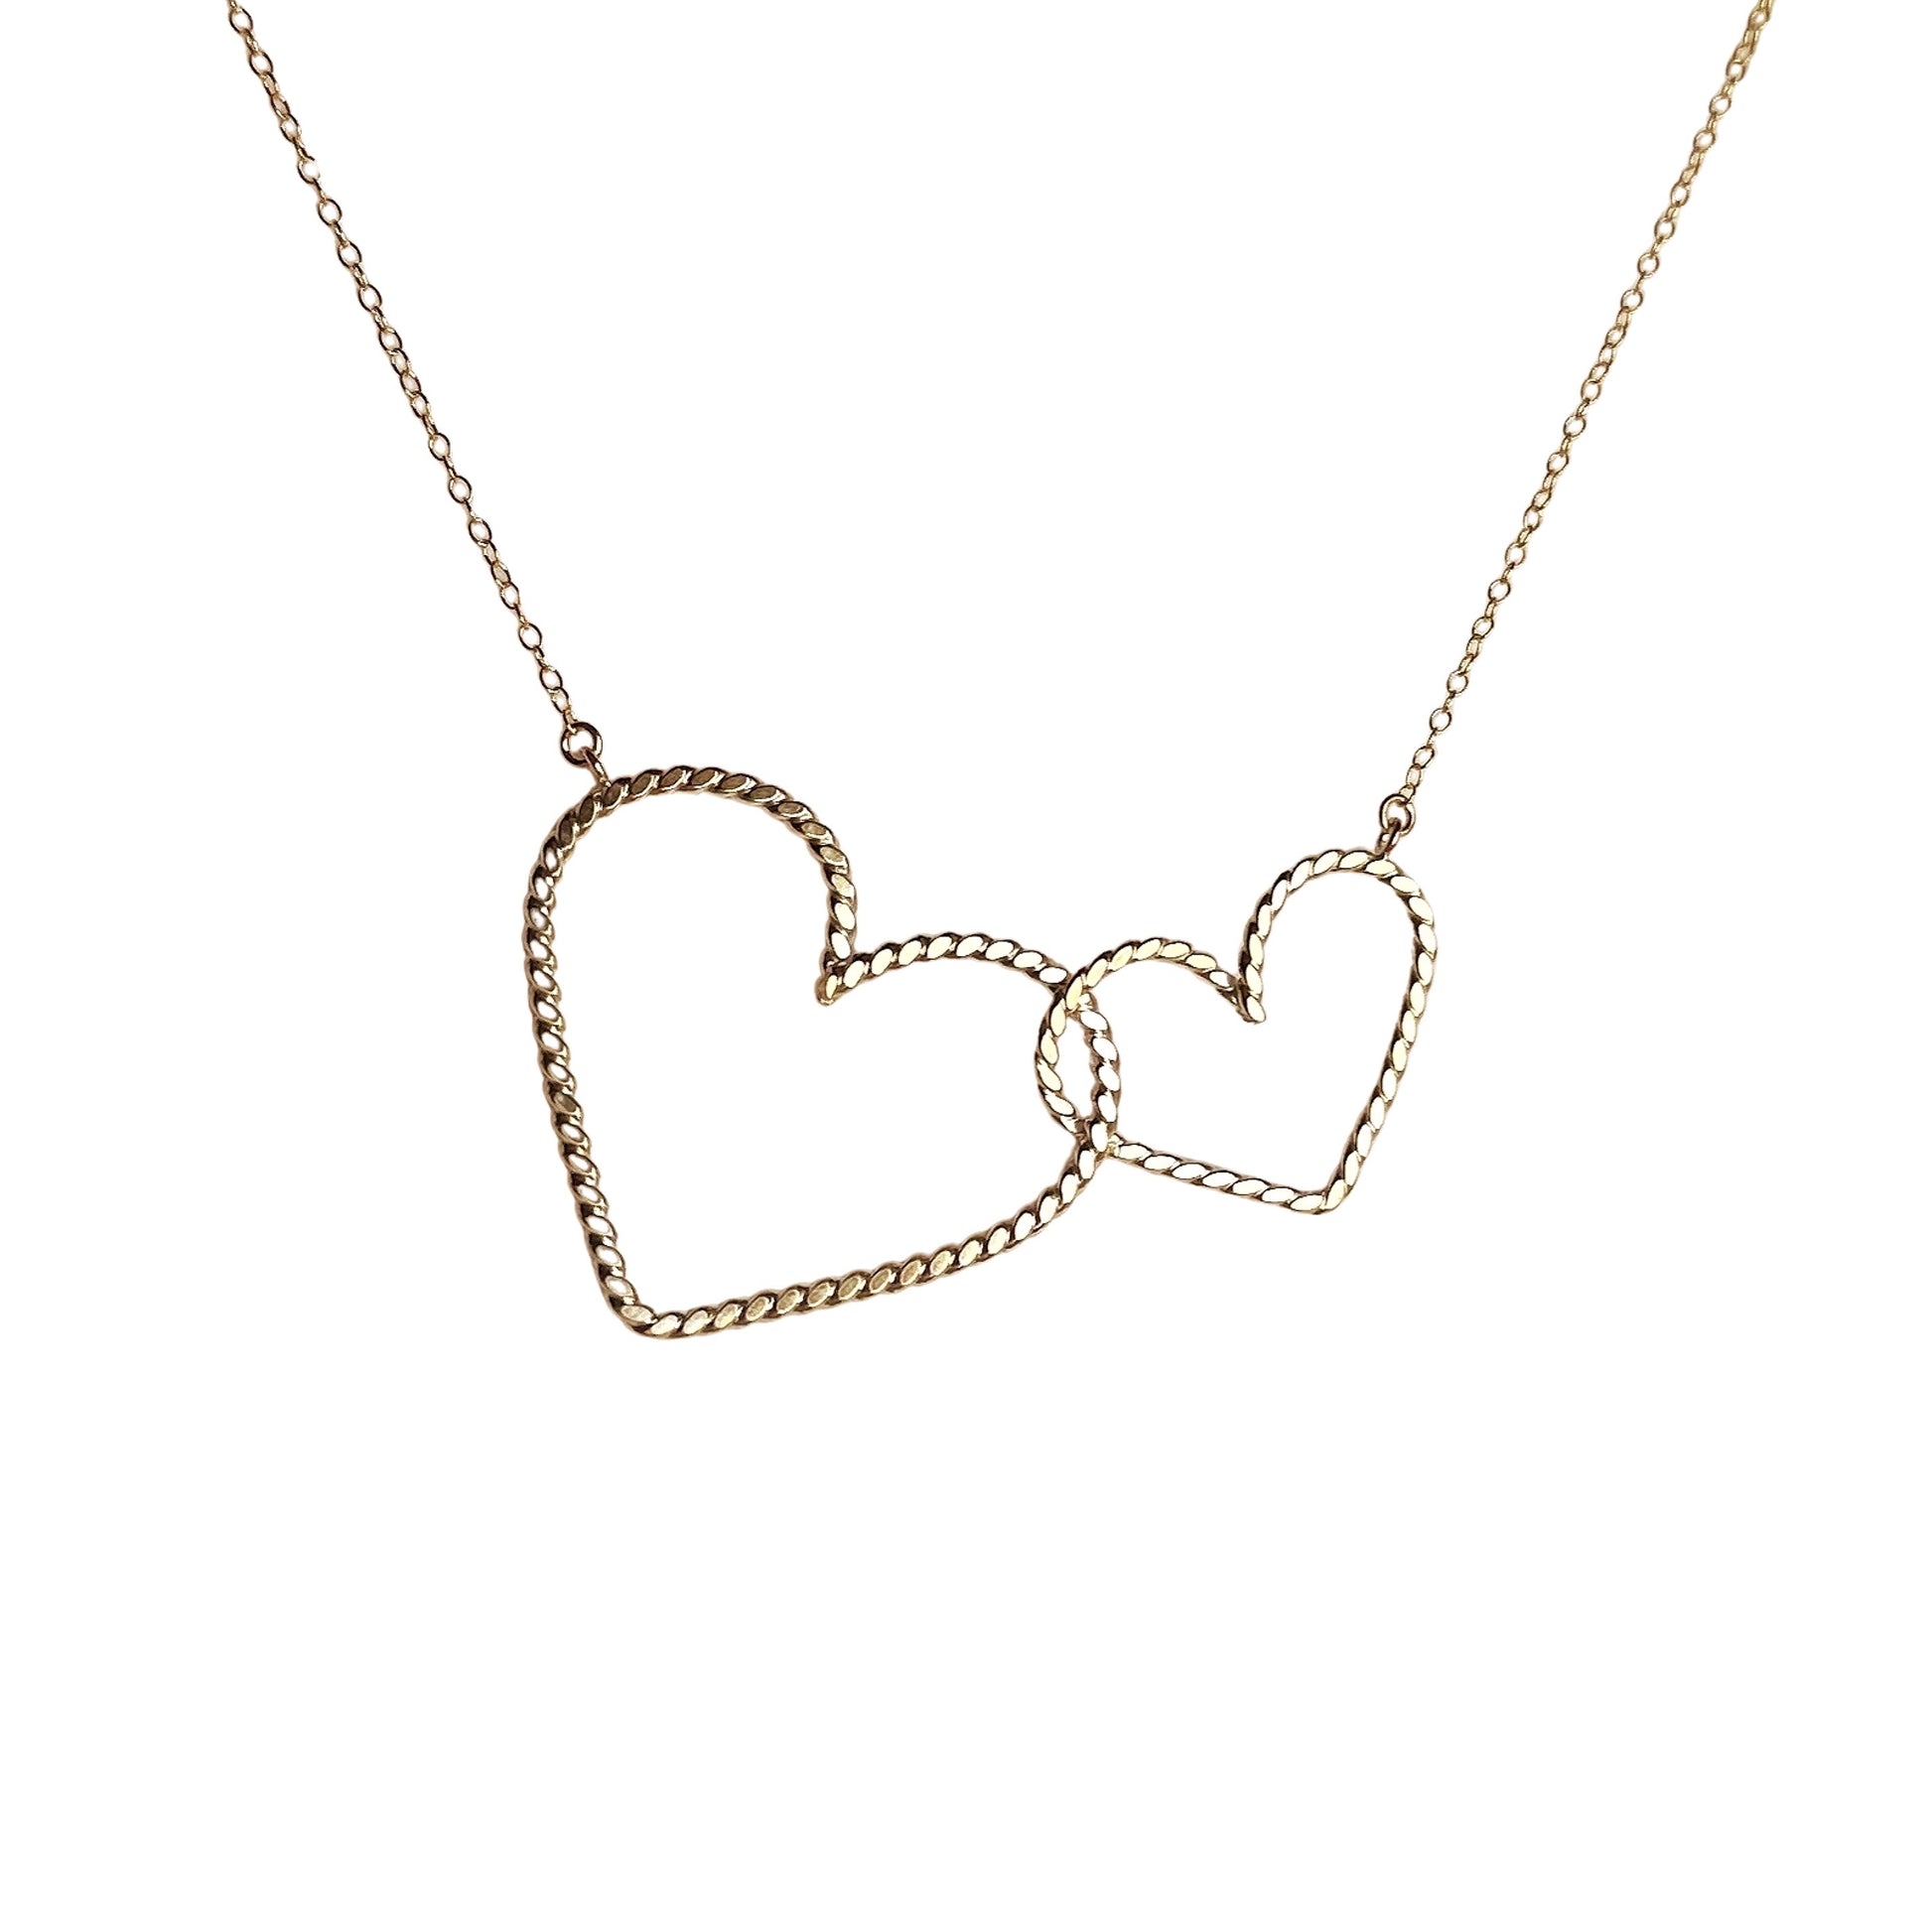 gold interlocking heart necklace, 2 hearts one big one smaller interlocked and hanging from a delicate gold chain